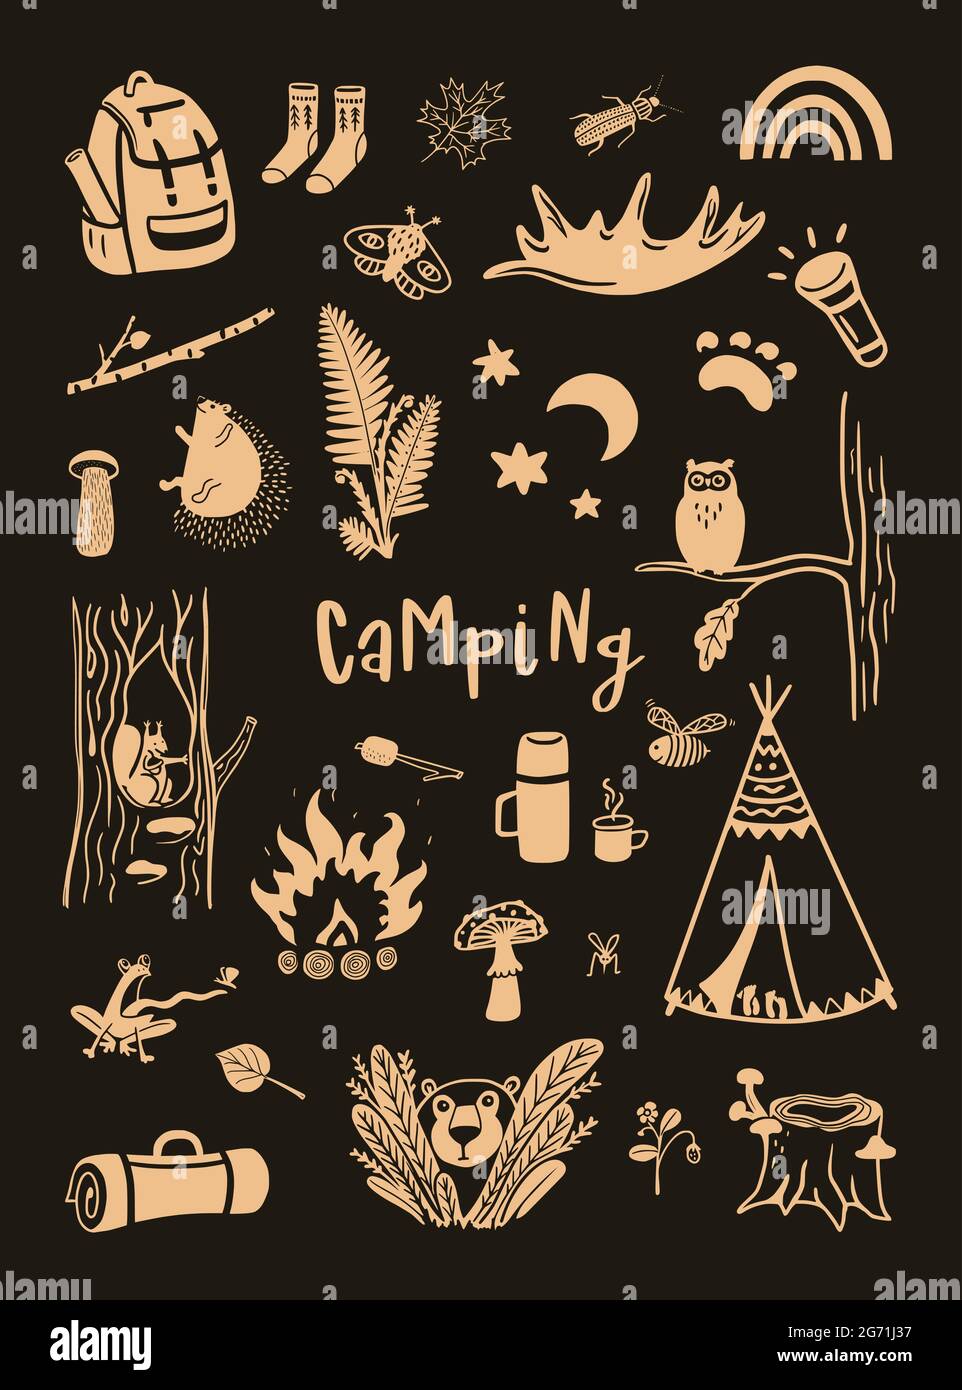 Camping hand drawn cute vector elements against the dark background Stock Vector